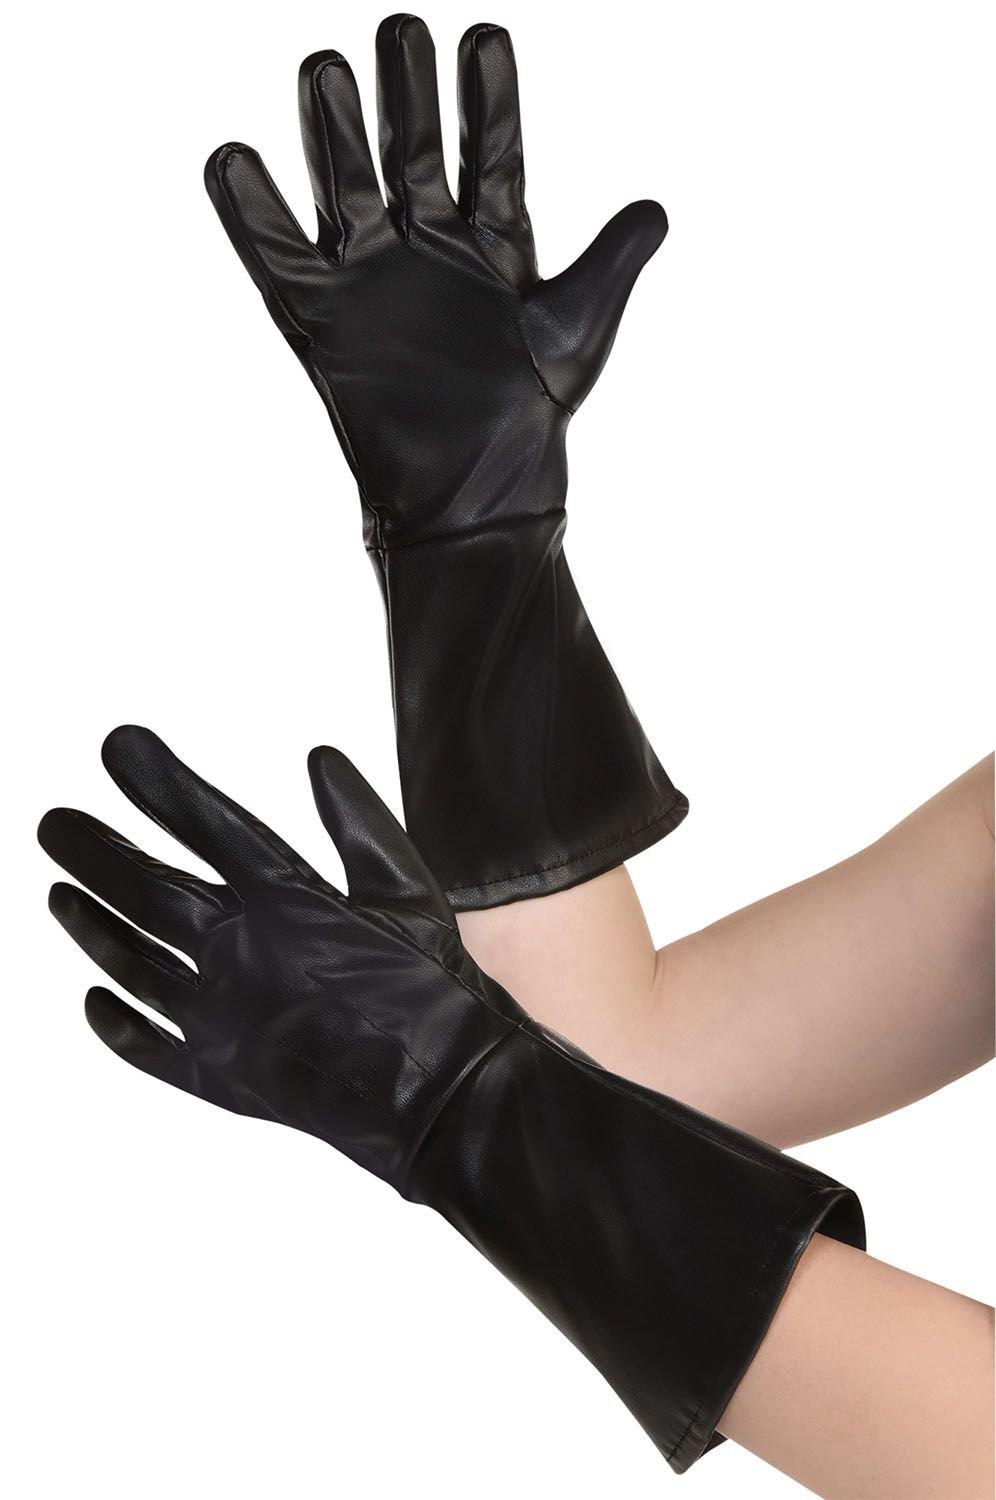 | City Gloves Party Kids for Black Leather Long